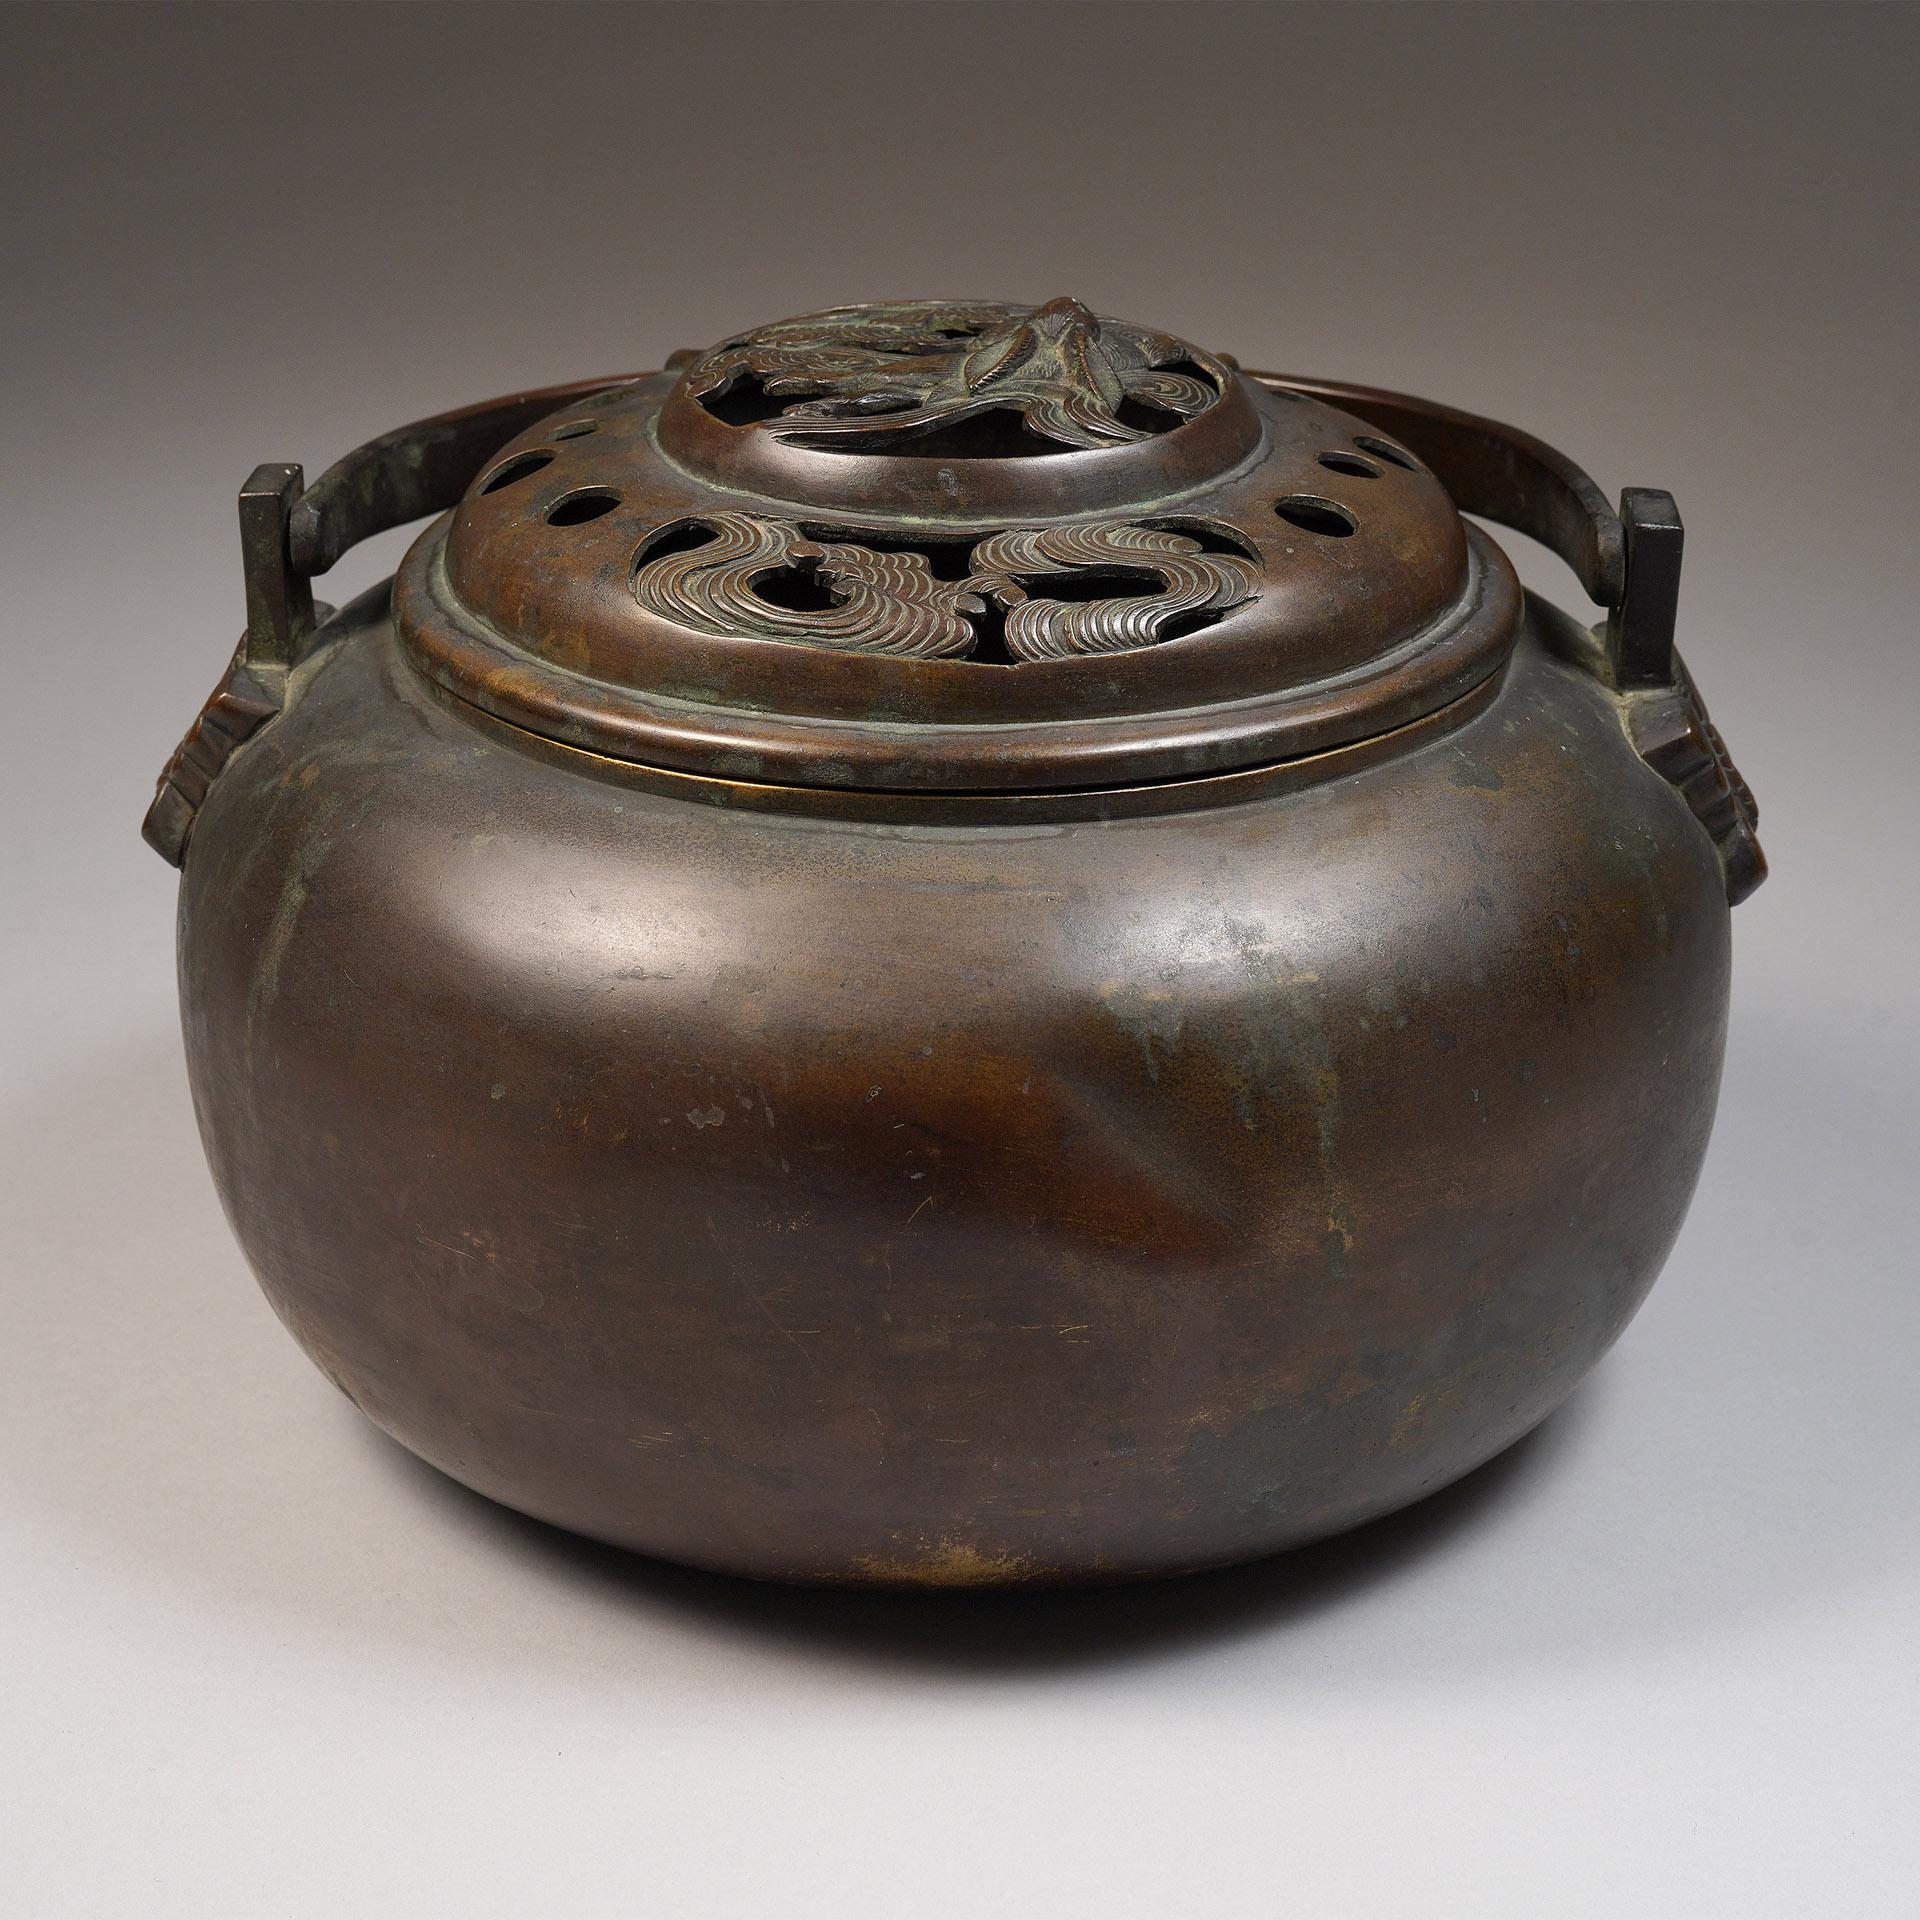 Handwarmer/Censer 
Japan 
circa 19th century
Bronze
Measures: H: 5.5 in x D: 8 in :: 14 cm x 20.3 cm

Happy Tibetan New Year of the Water Rabbit!

The top depicts the Japanese legendary Shiro Usagi (White Rabbit) who cleverly convinced the